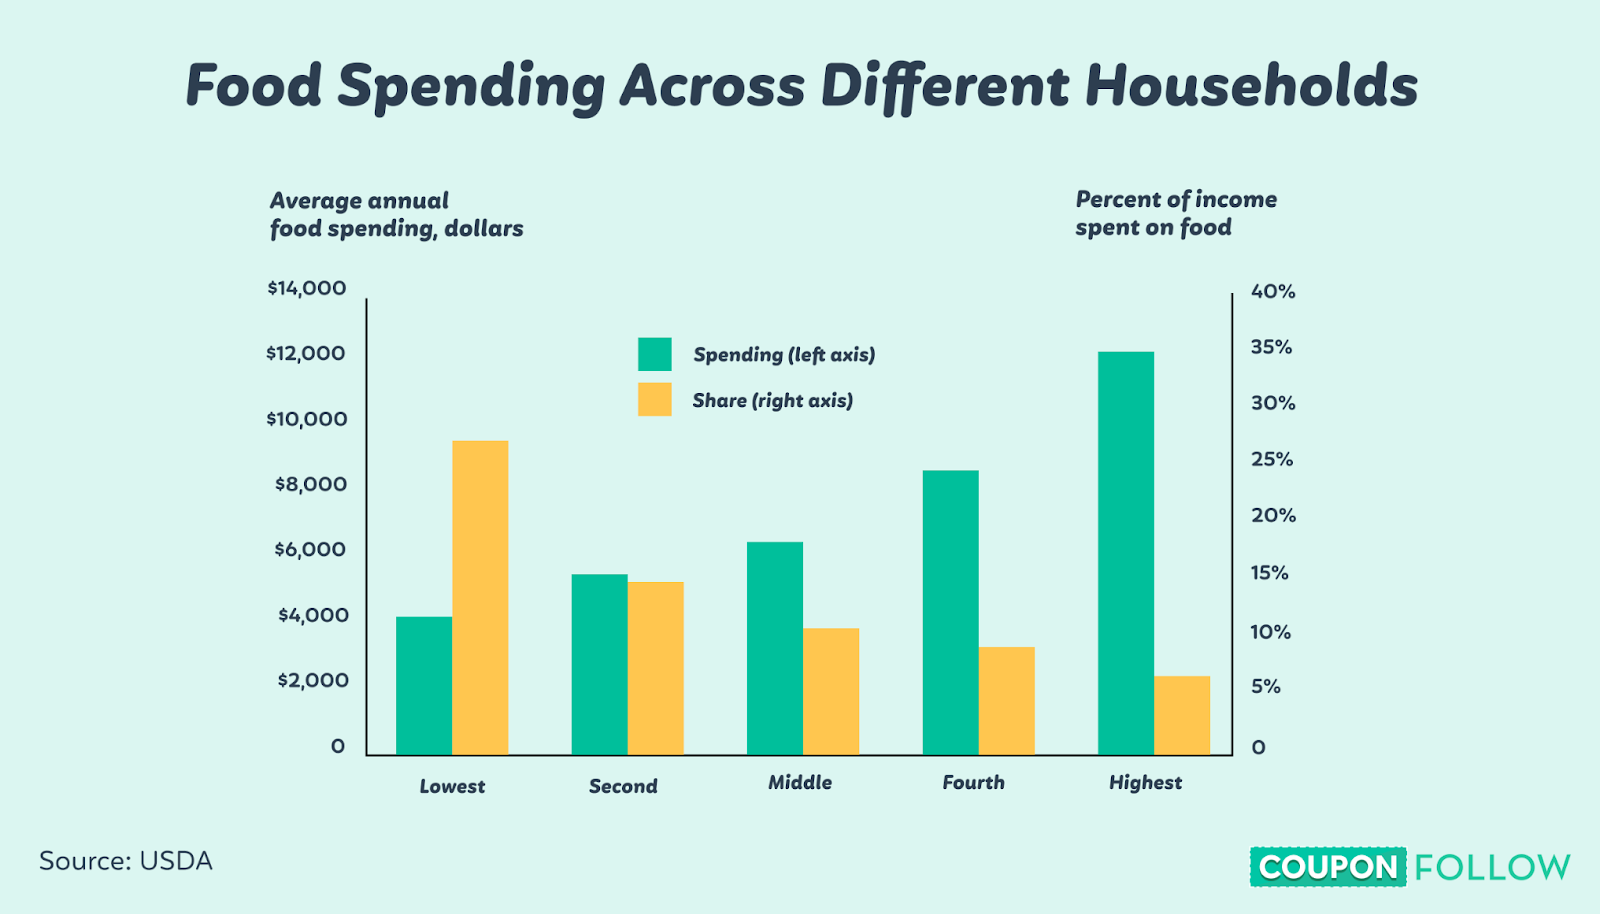 Graph showing food spending for different income households